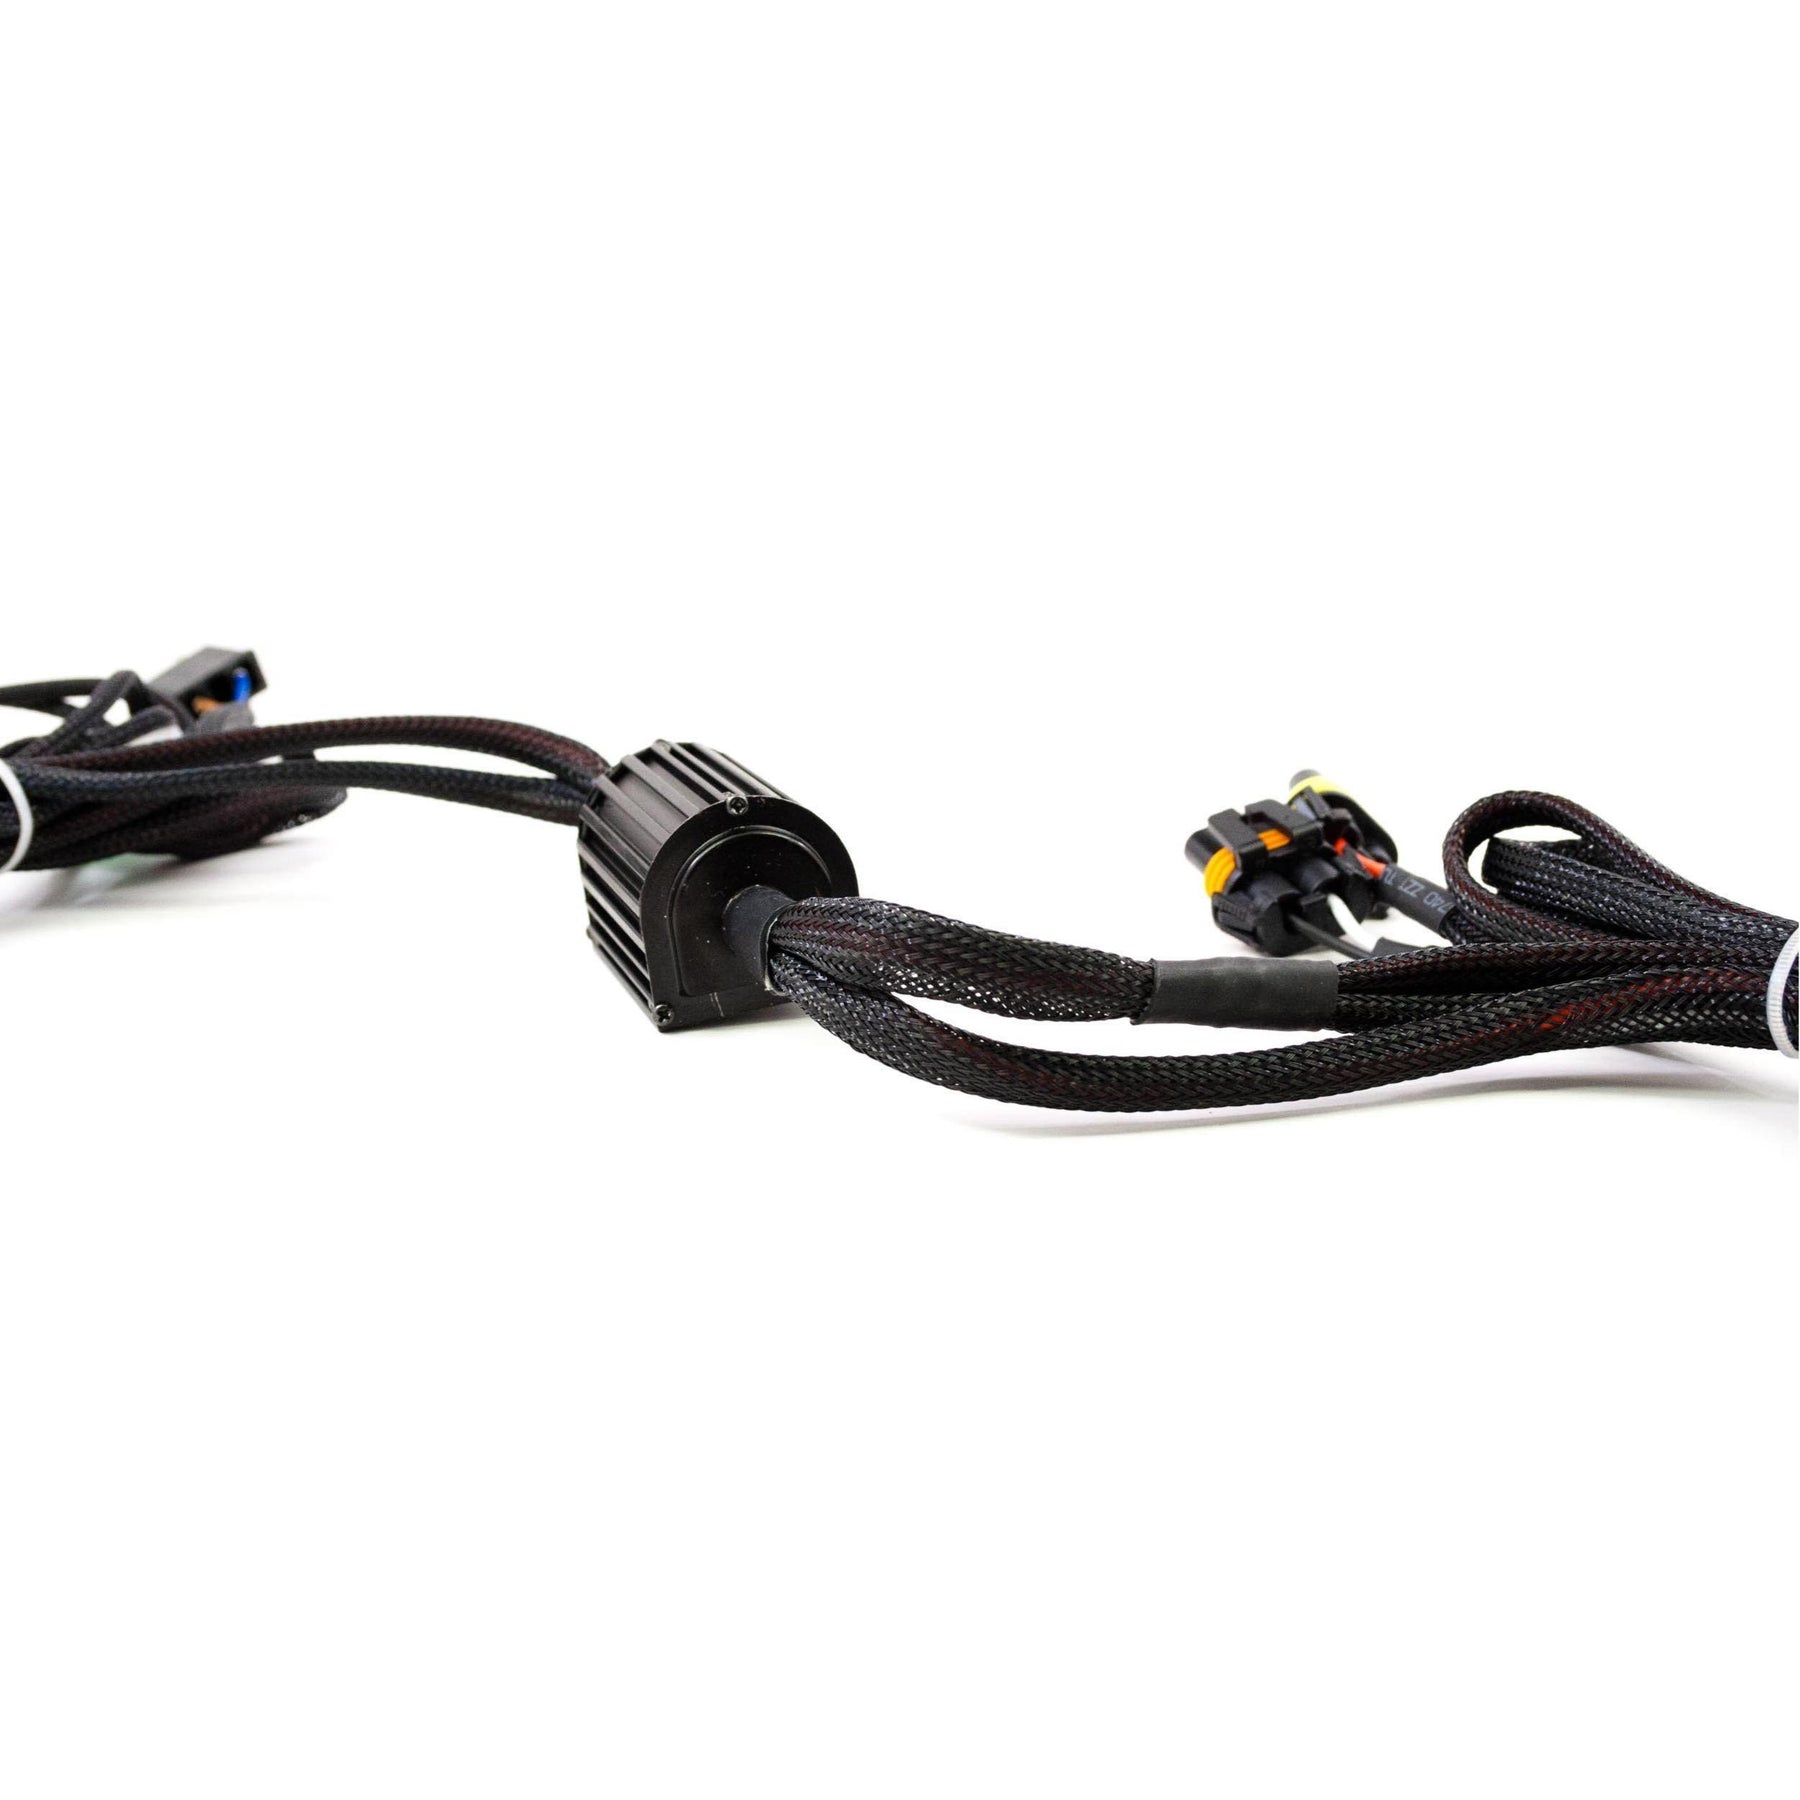 H11 Motorcycle Single Output HID Harness (H11) (H131)-Lighting Harness-Morimoto-H131-Dirty Diesel Customs